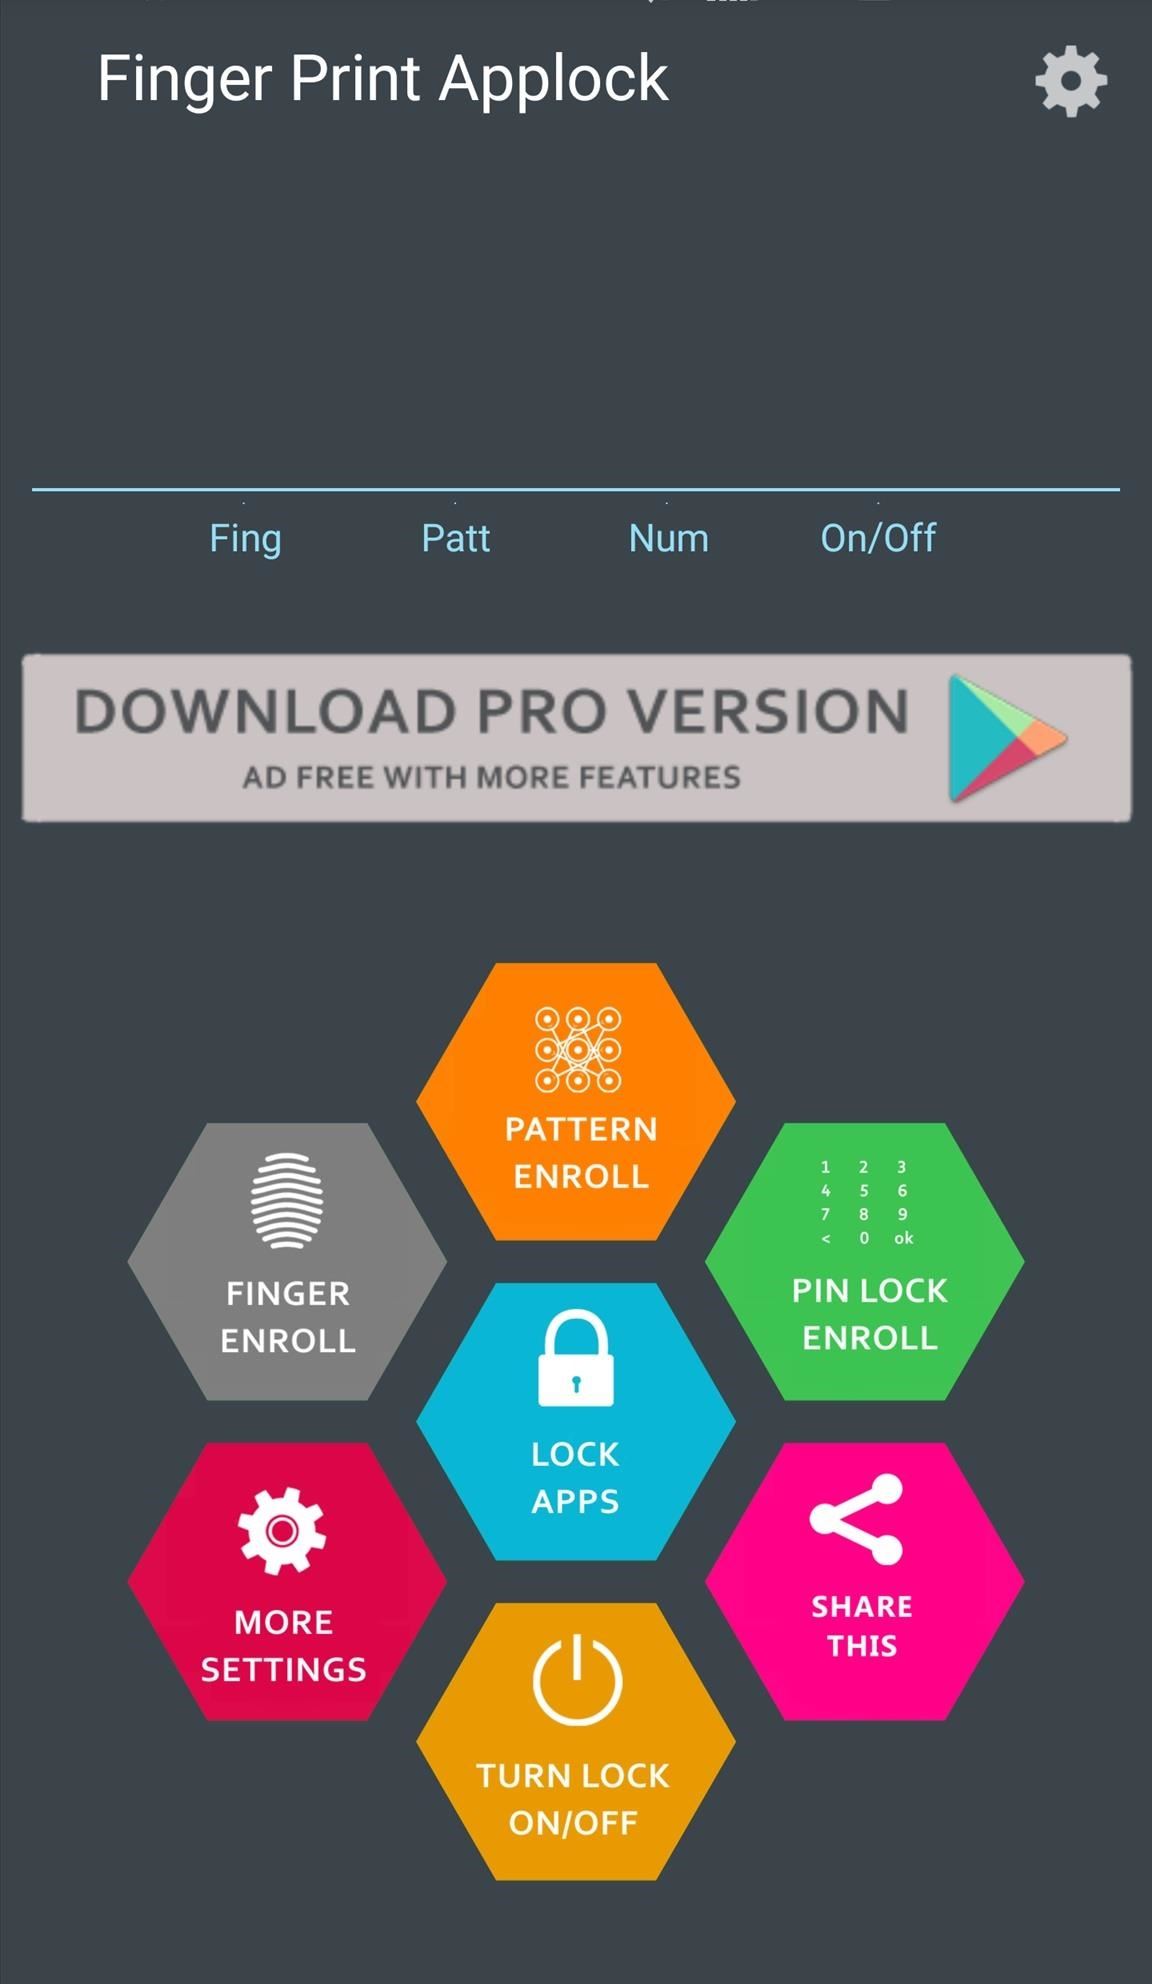 How to Fingerprint-Lock Apps on Android Without a Fingerprint Scanner